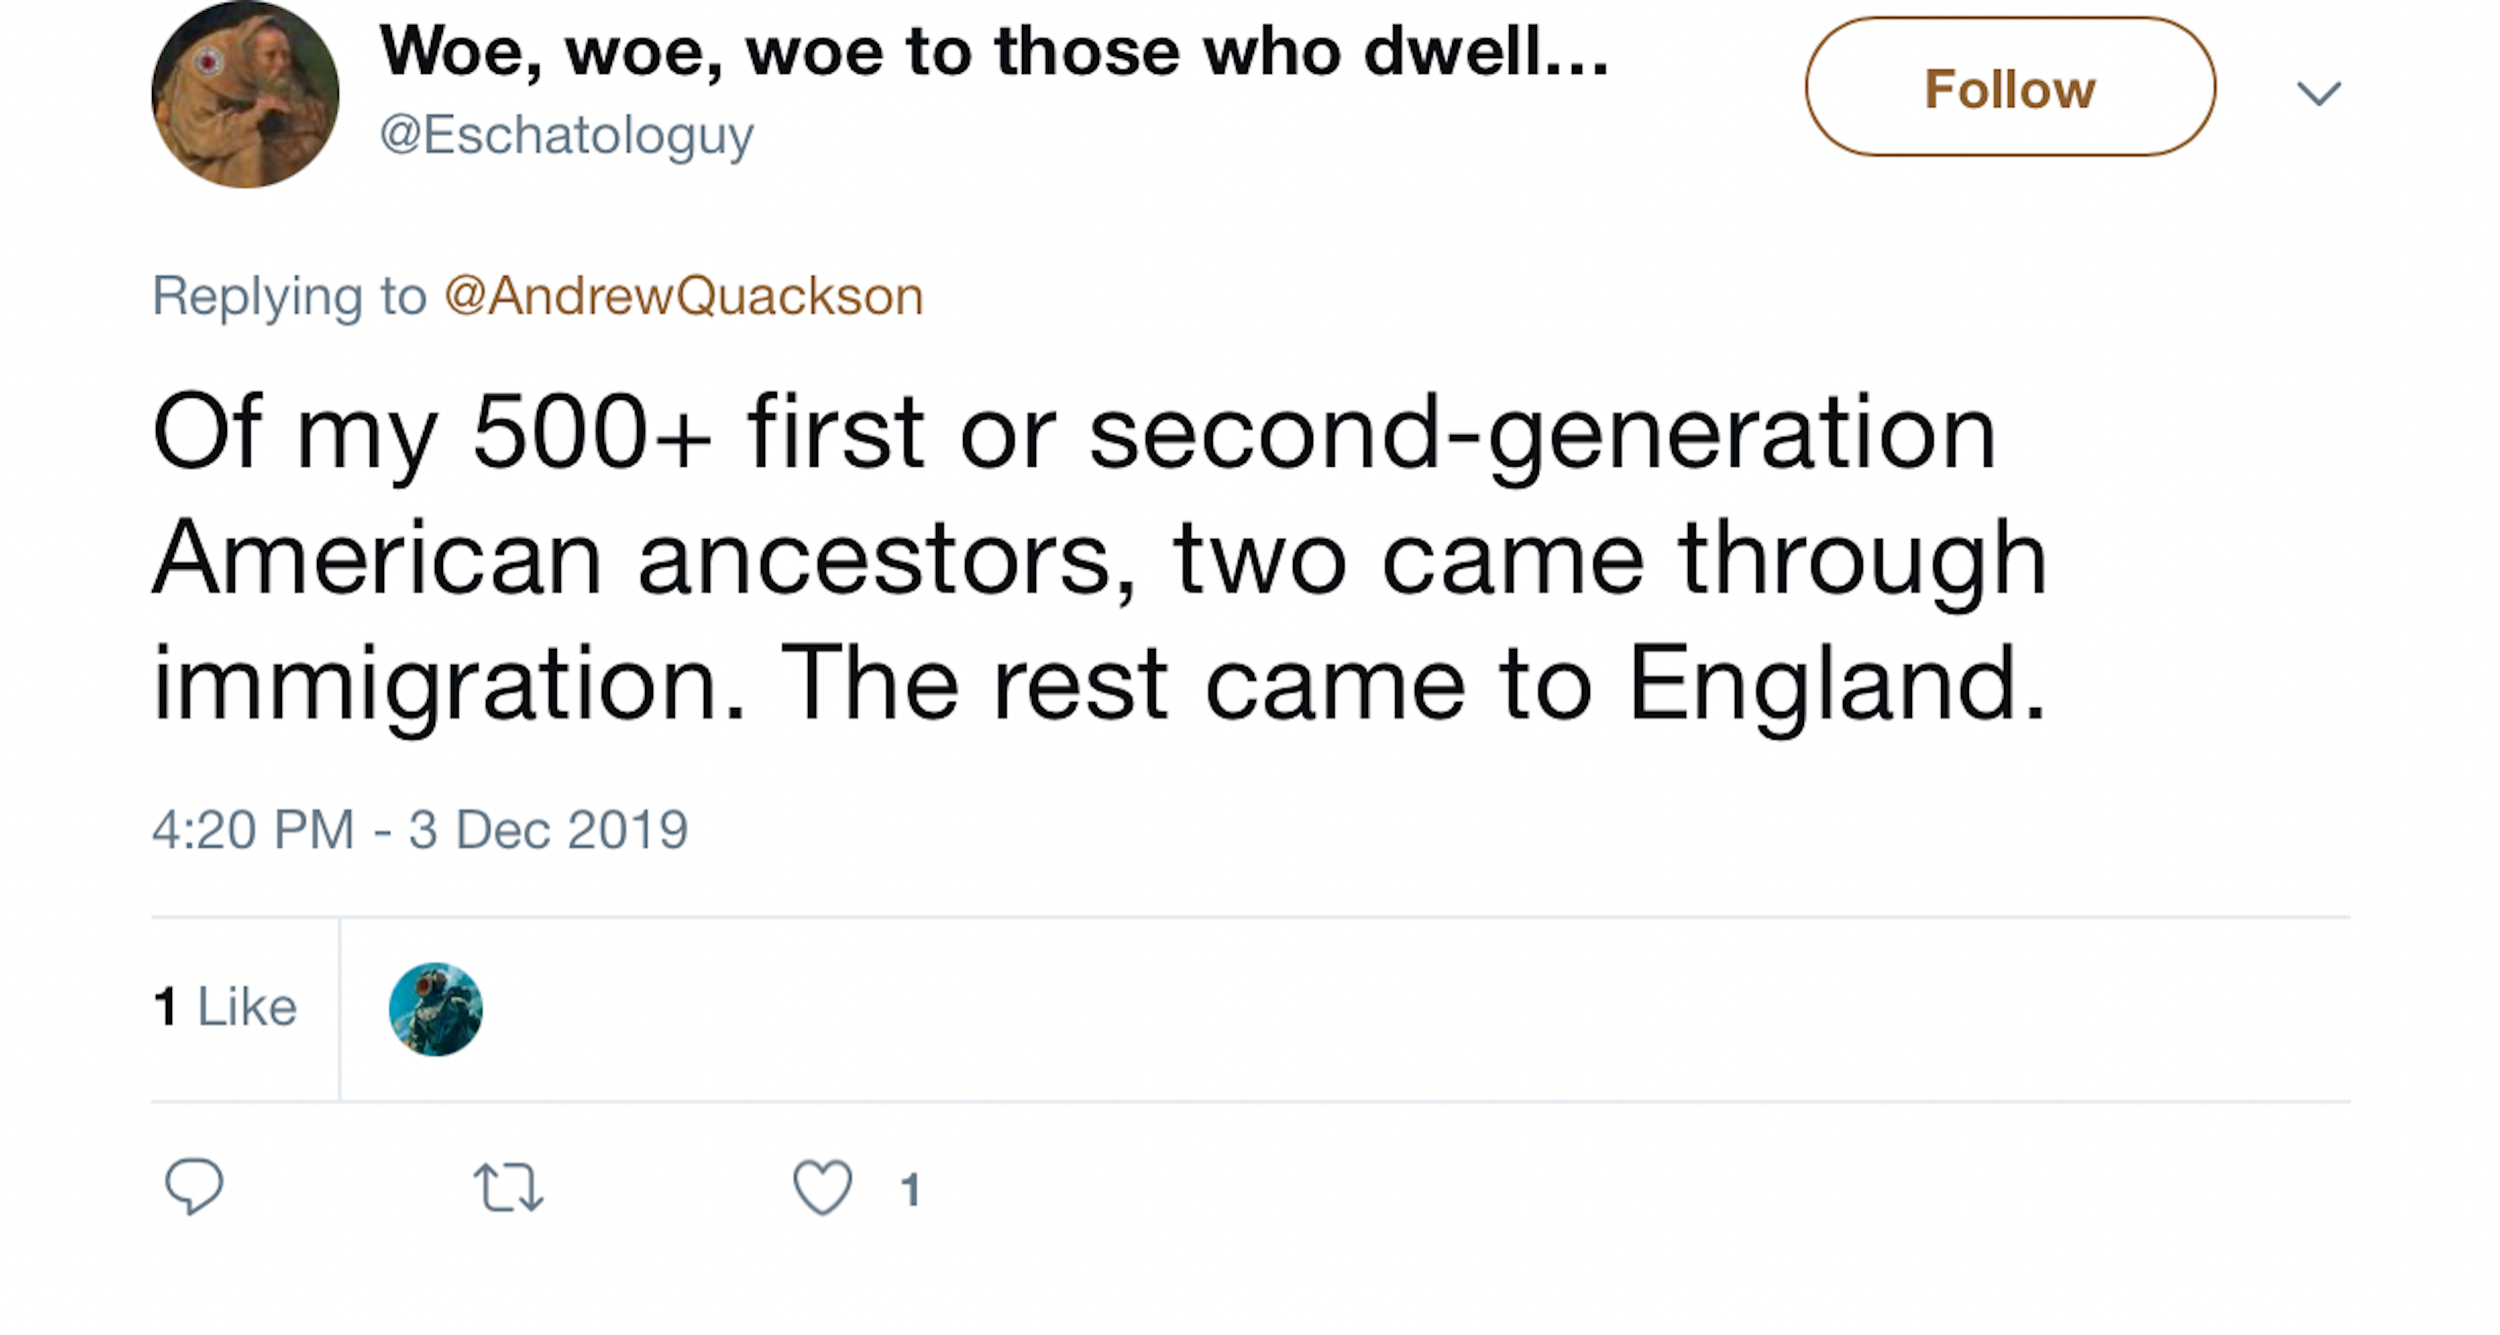 Woe saying that almost all of his first or second generation American ancestors “came to England” (presumably meaning they arrived before foundation of the US)